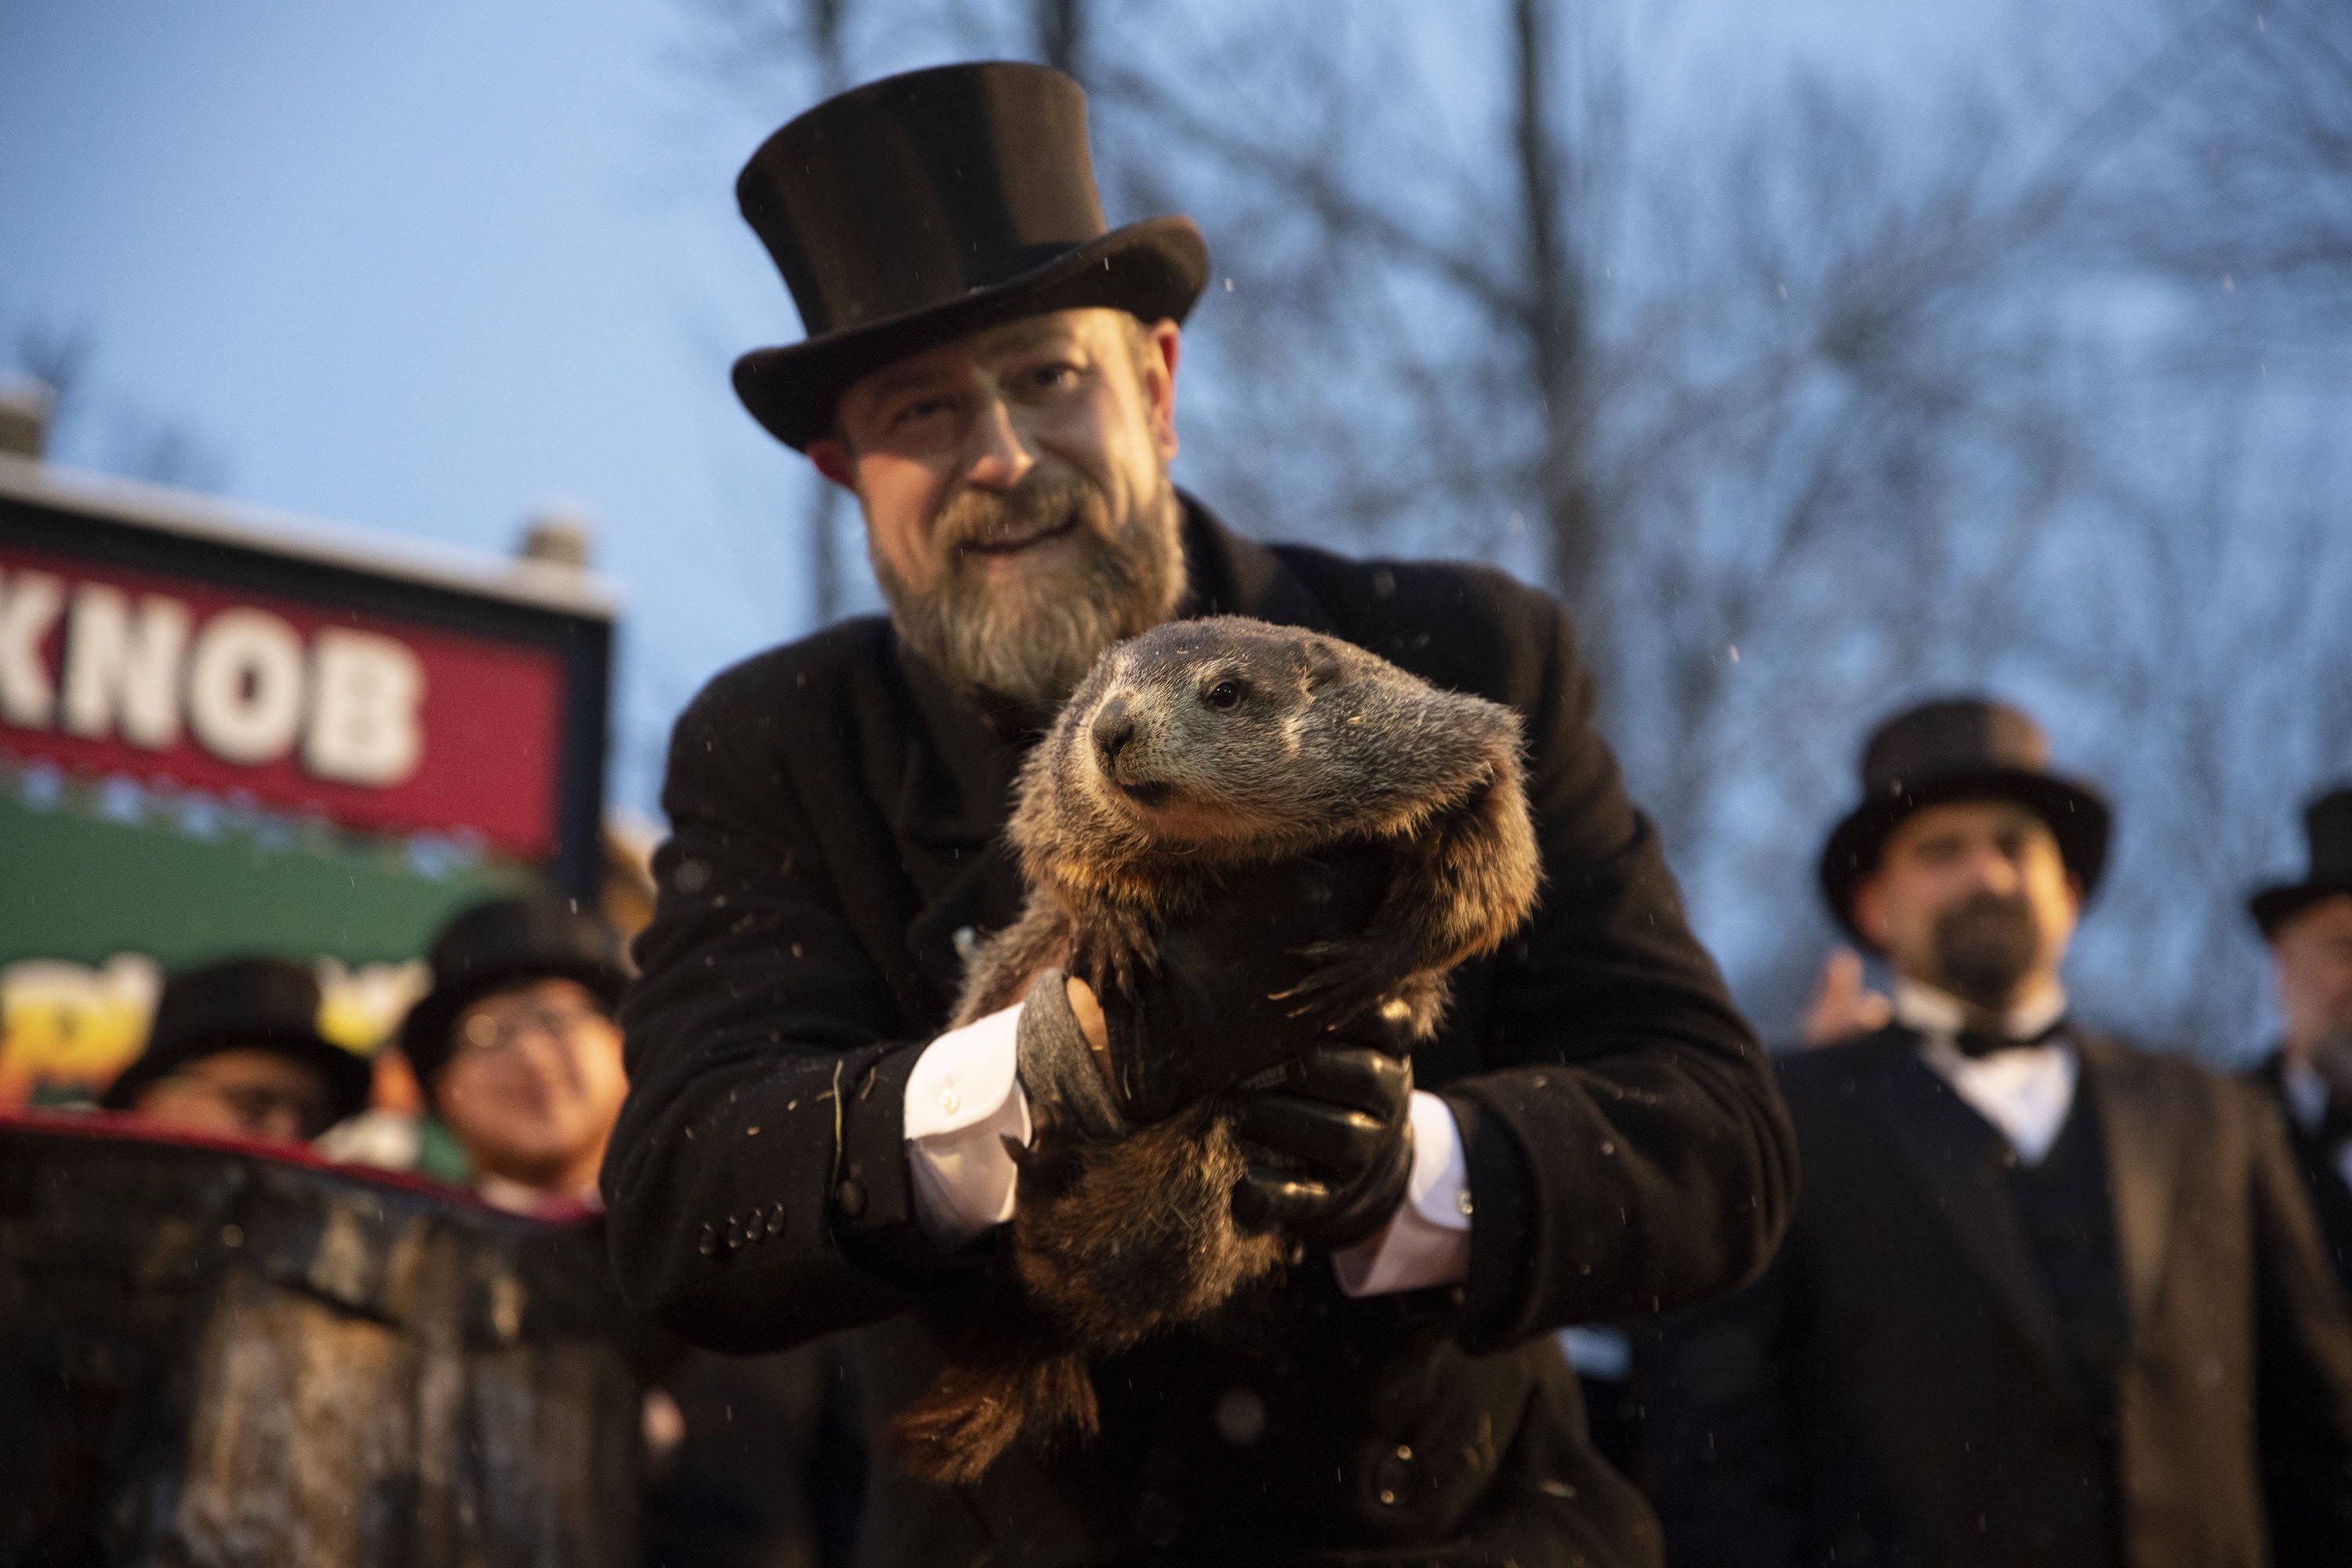  Pennsylvania groundhog declares early spring ‘a certainty’ 